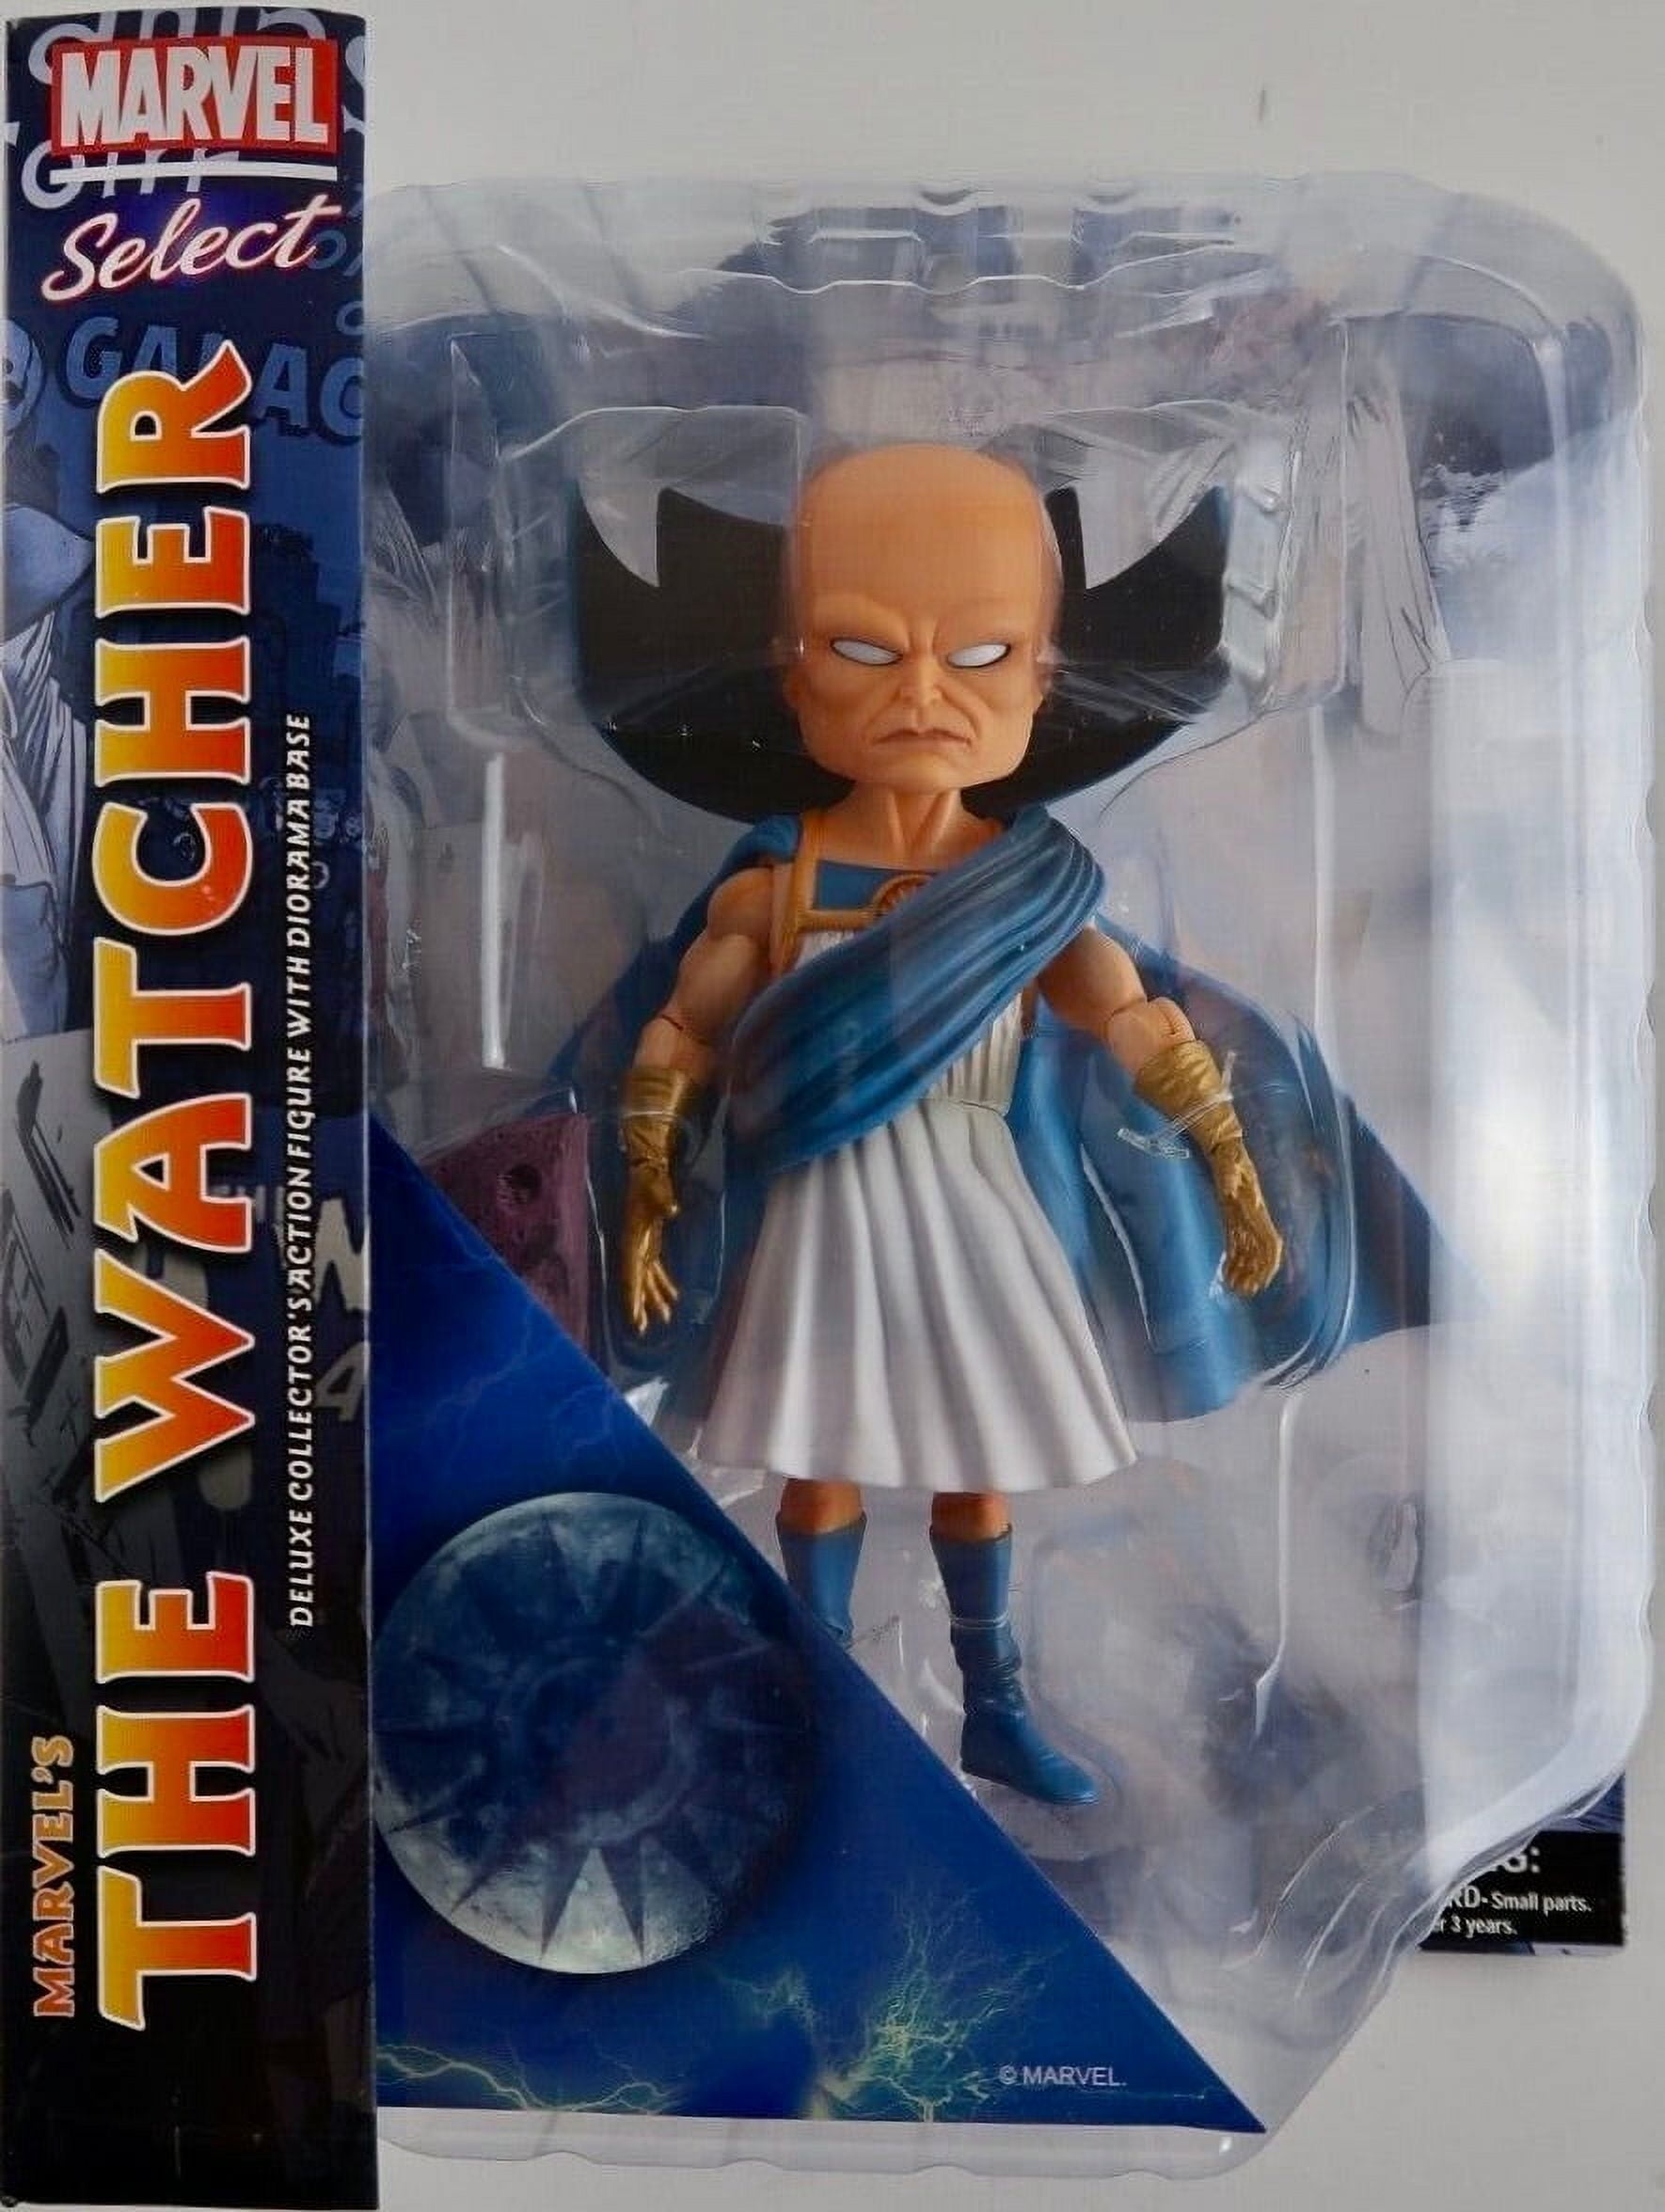 Diamond Select Toys Marvel Select: The Watcher Action Figure, Multicolor